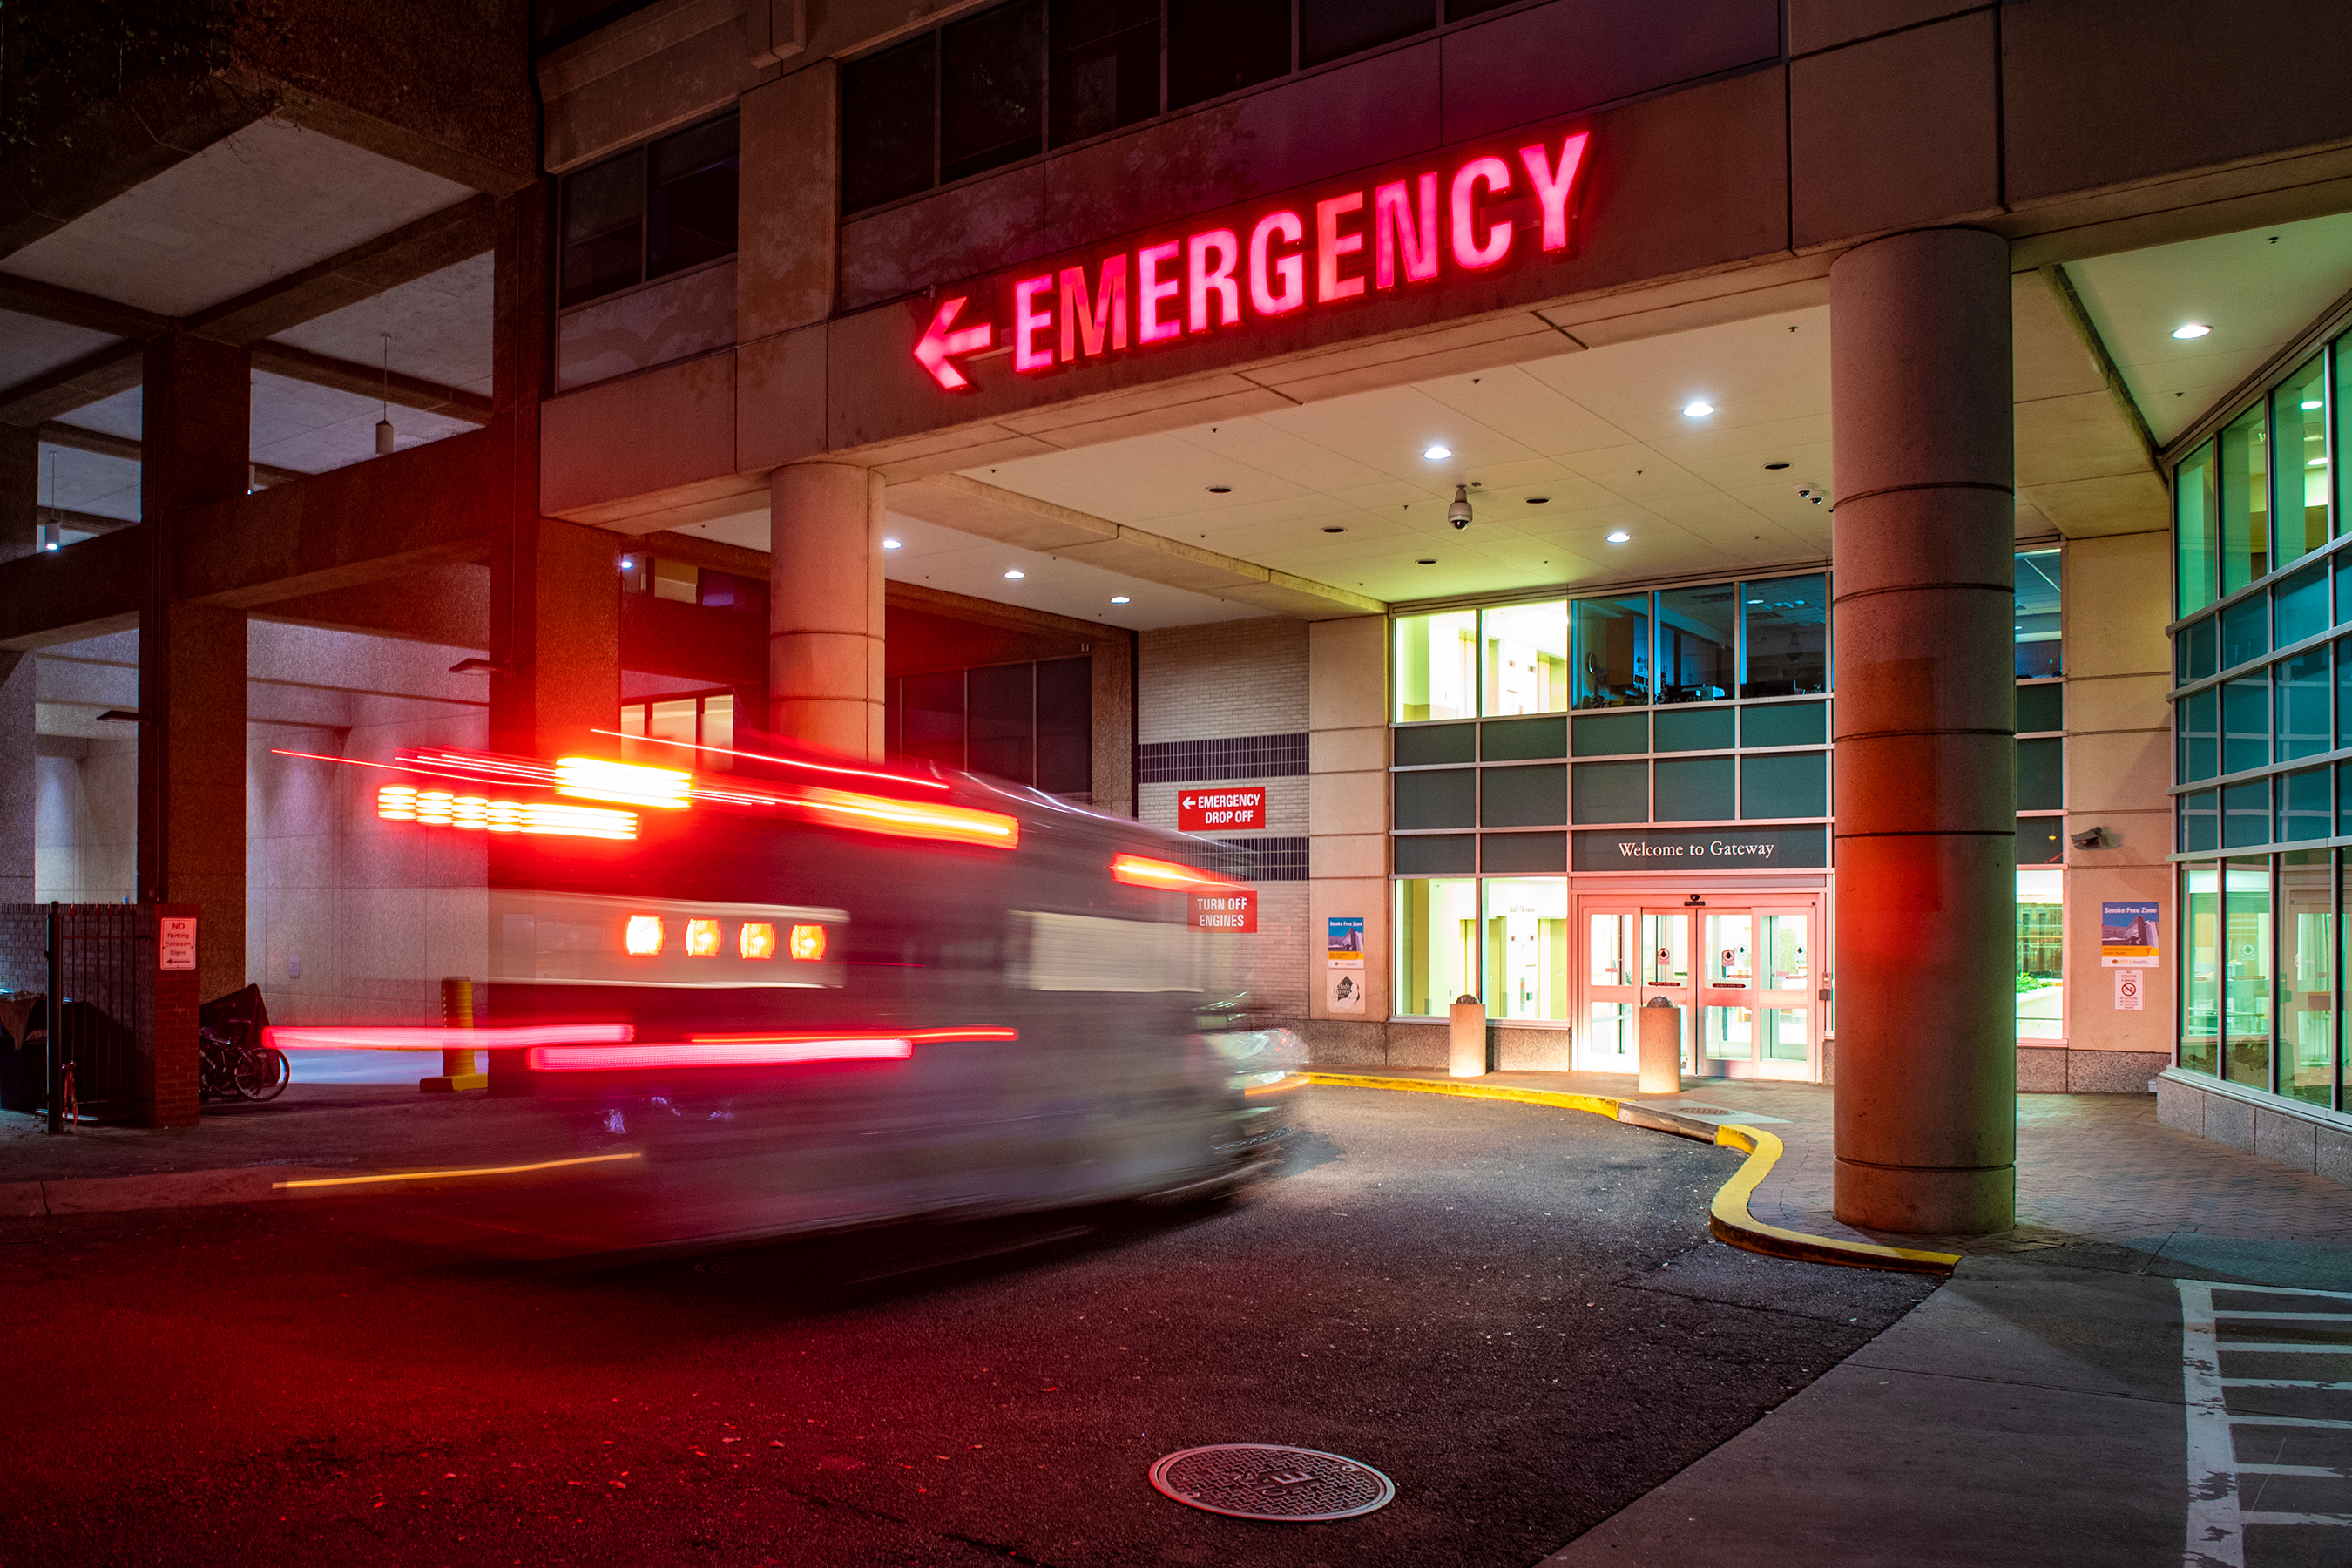 Facing rising overdoses, VCU Health strengthens bridge between urgent ER care and long-term addiction services